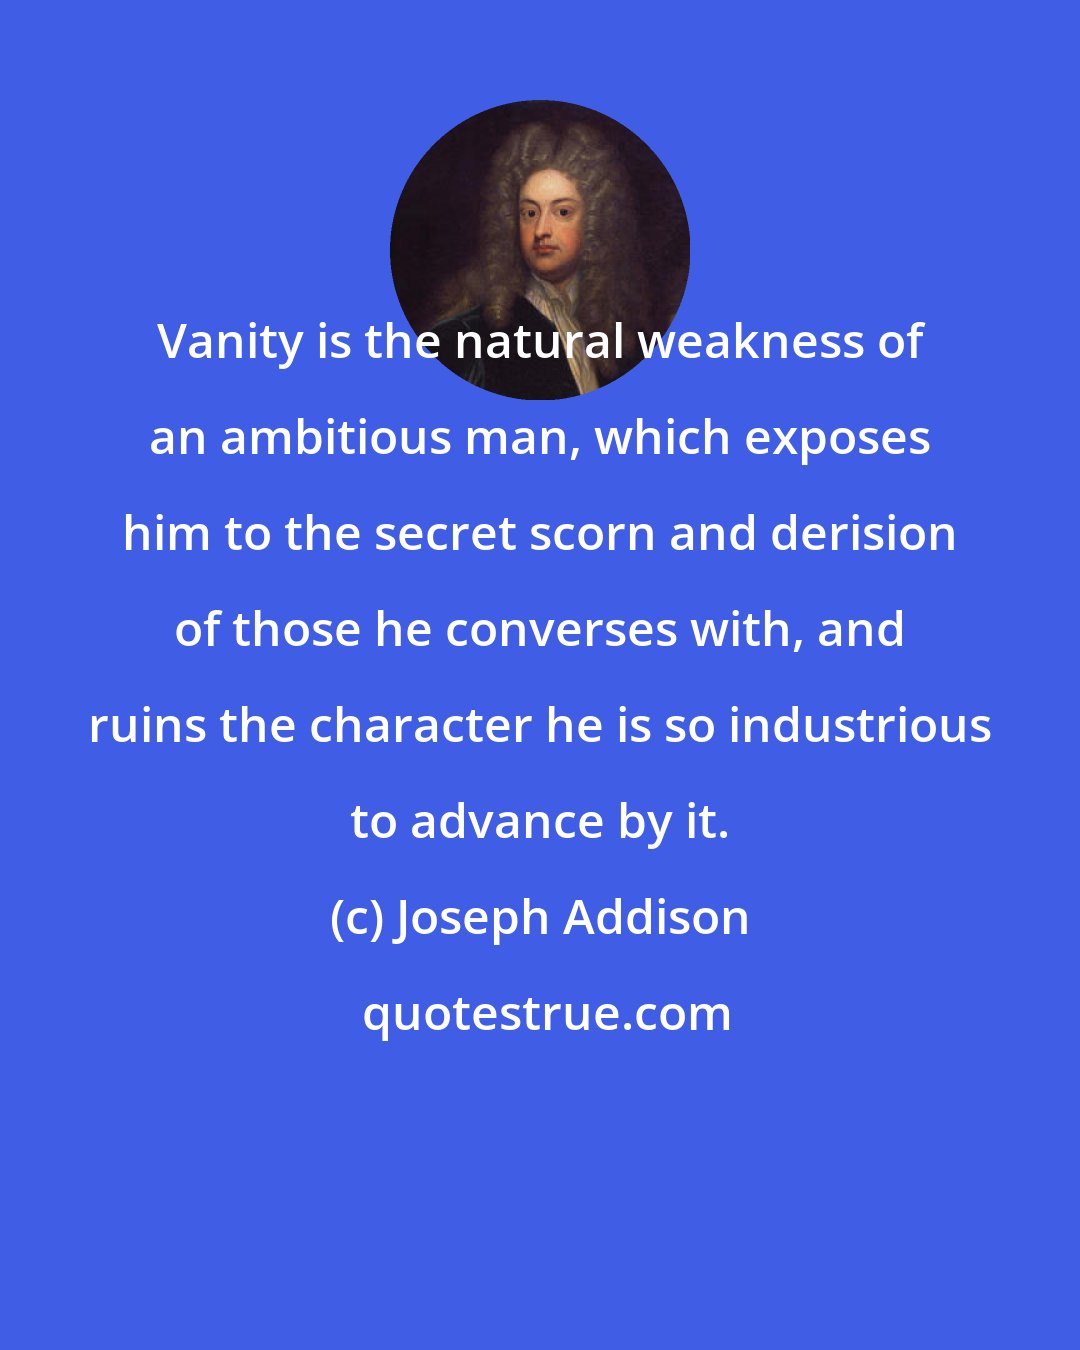 Joseph Addison: Vanity is the natural weakness of an ambitious man, which exposes him to the secret scorn and derision of those he converses with, and ruins the character he is so industrious to advance by it.